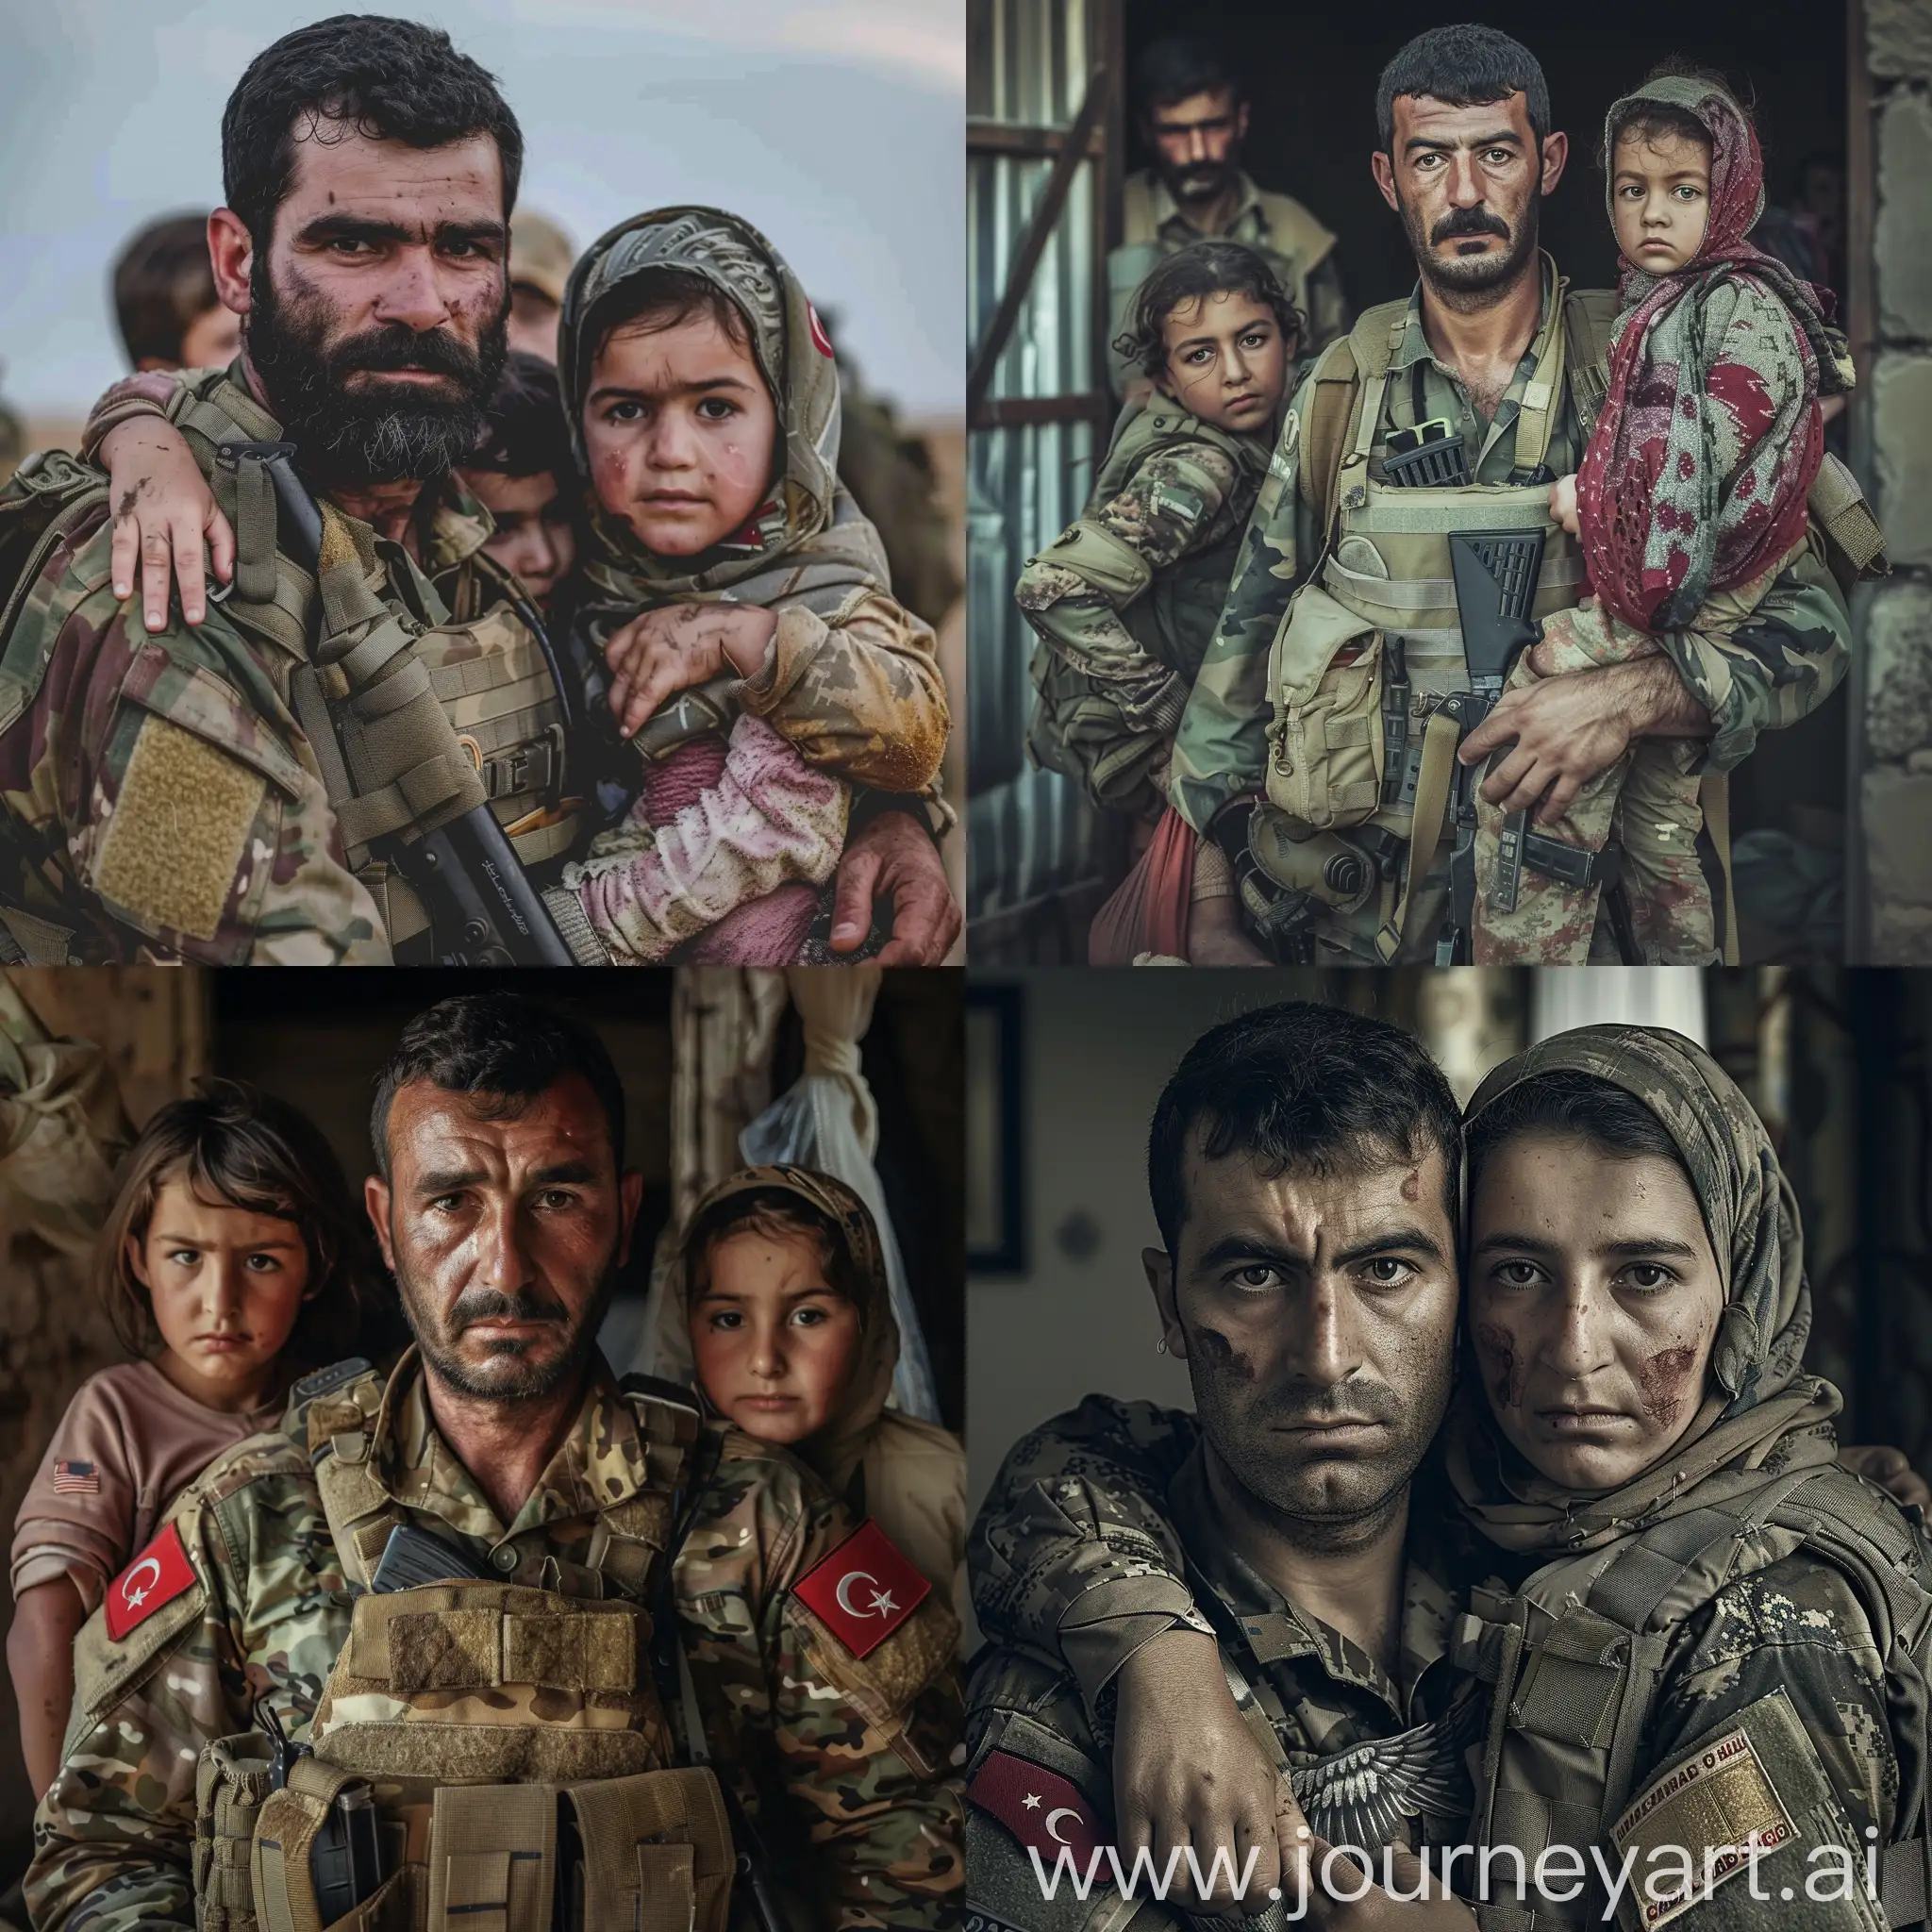 Turkish-Soldier-Departing-for-Duty-Leaving-Family-Behind